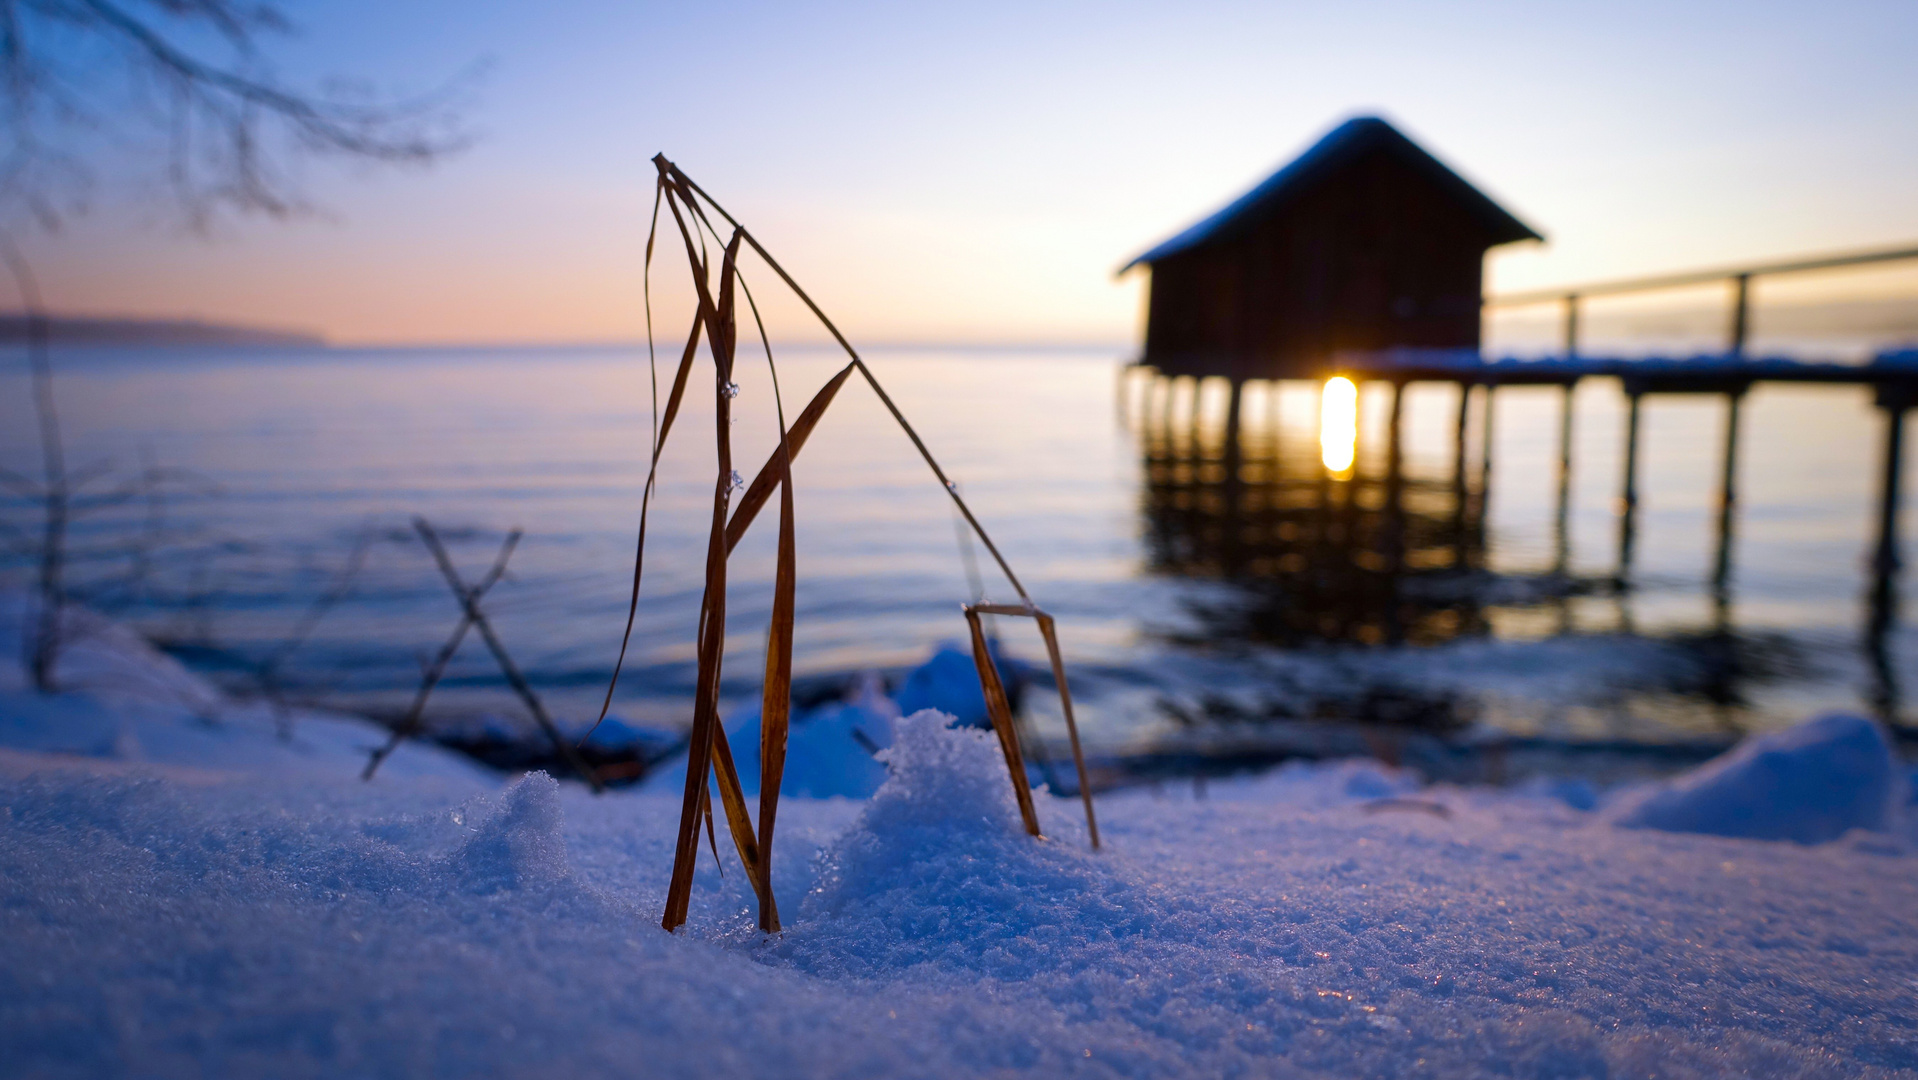 Winter am Ammersee